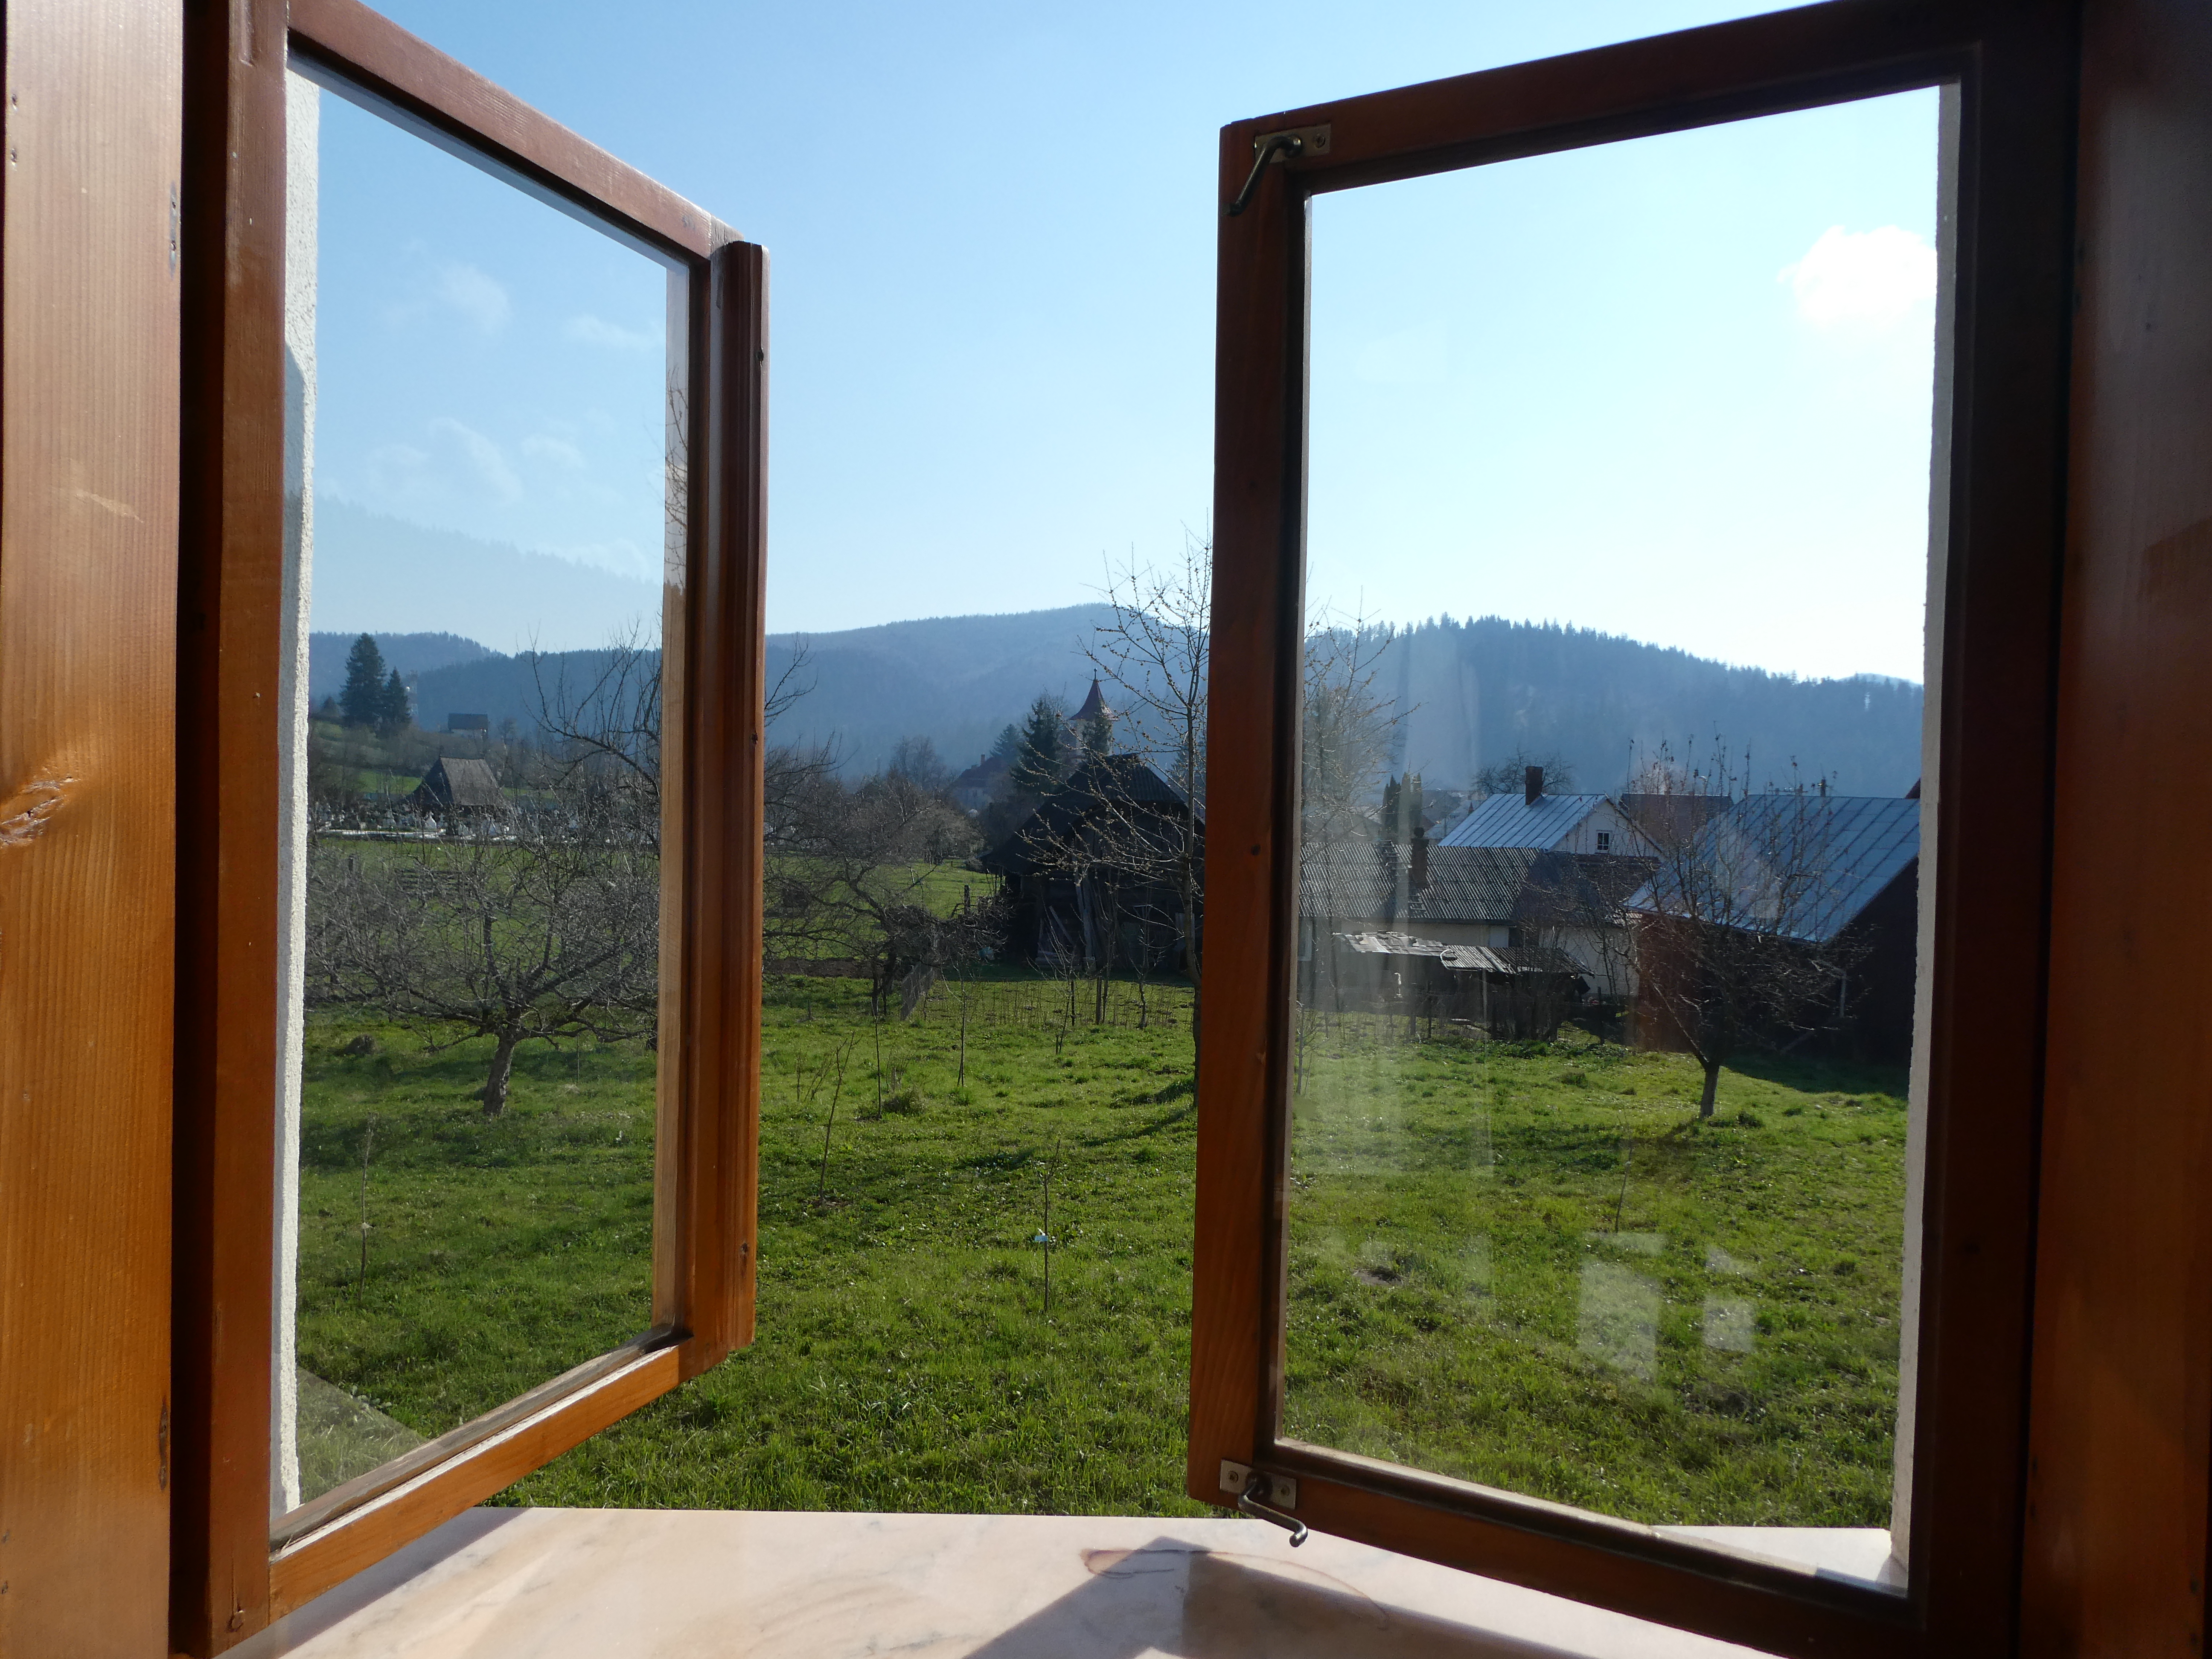 View from our 'cell' in Putna Monastery